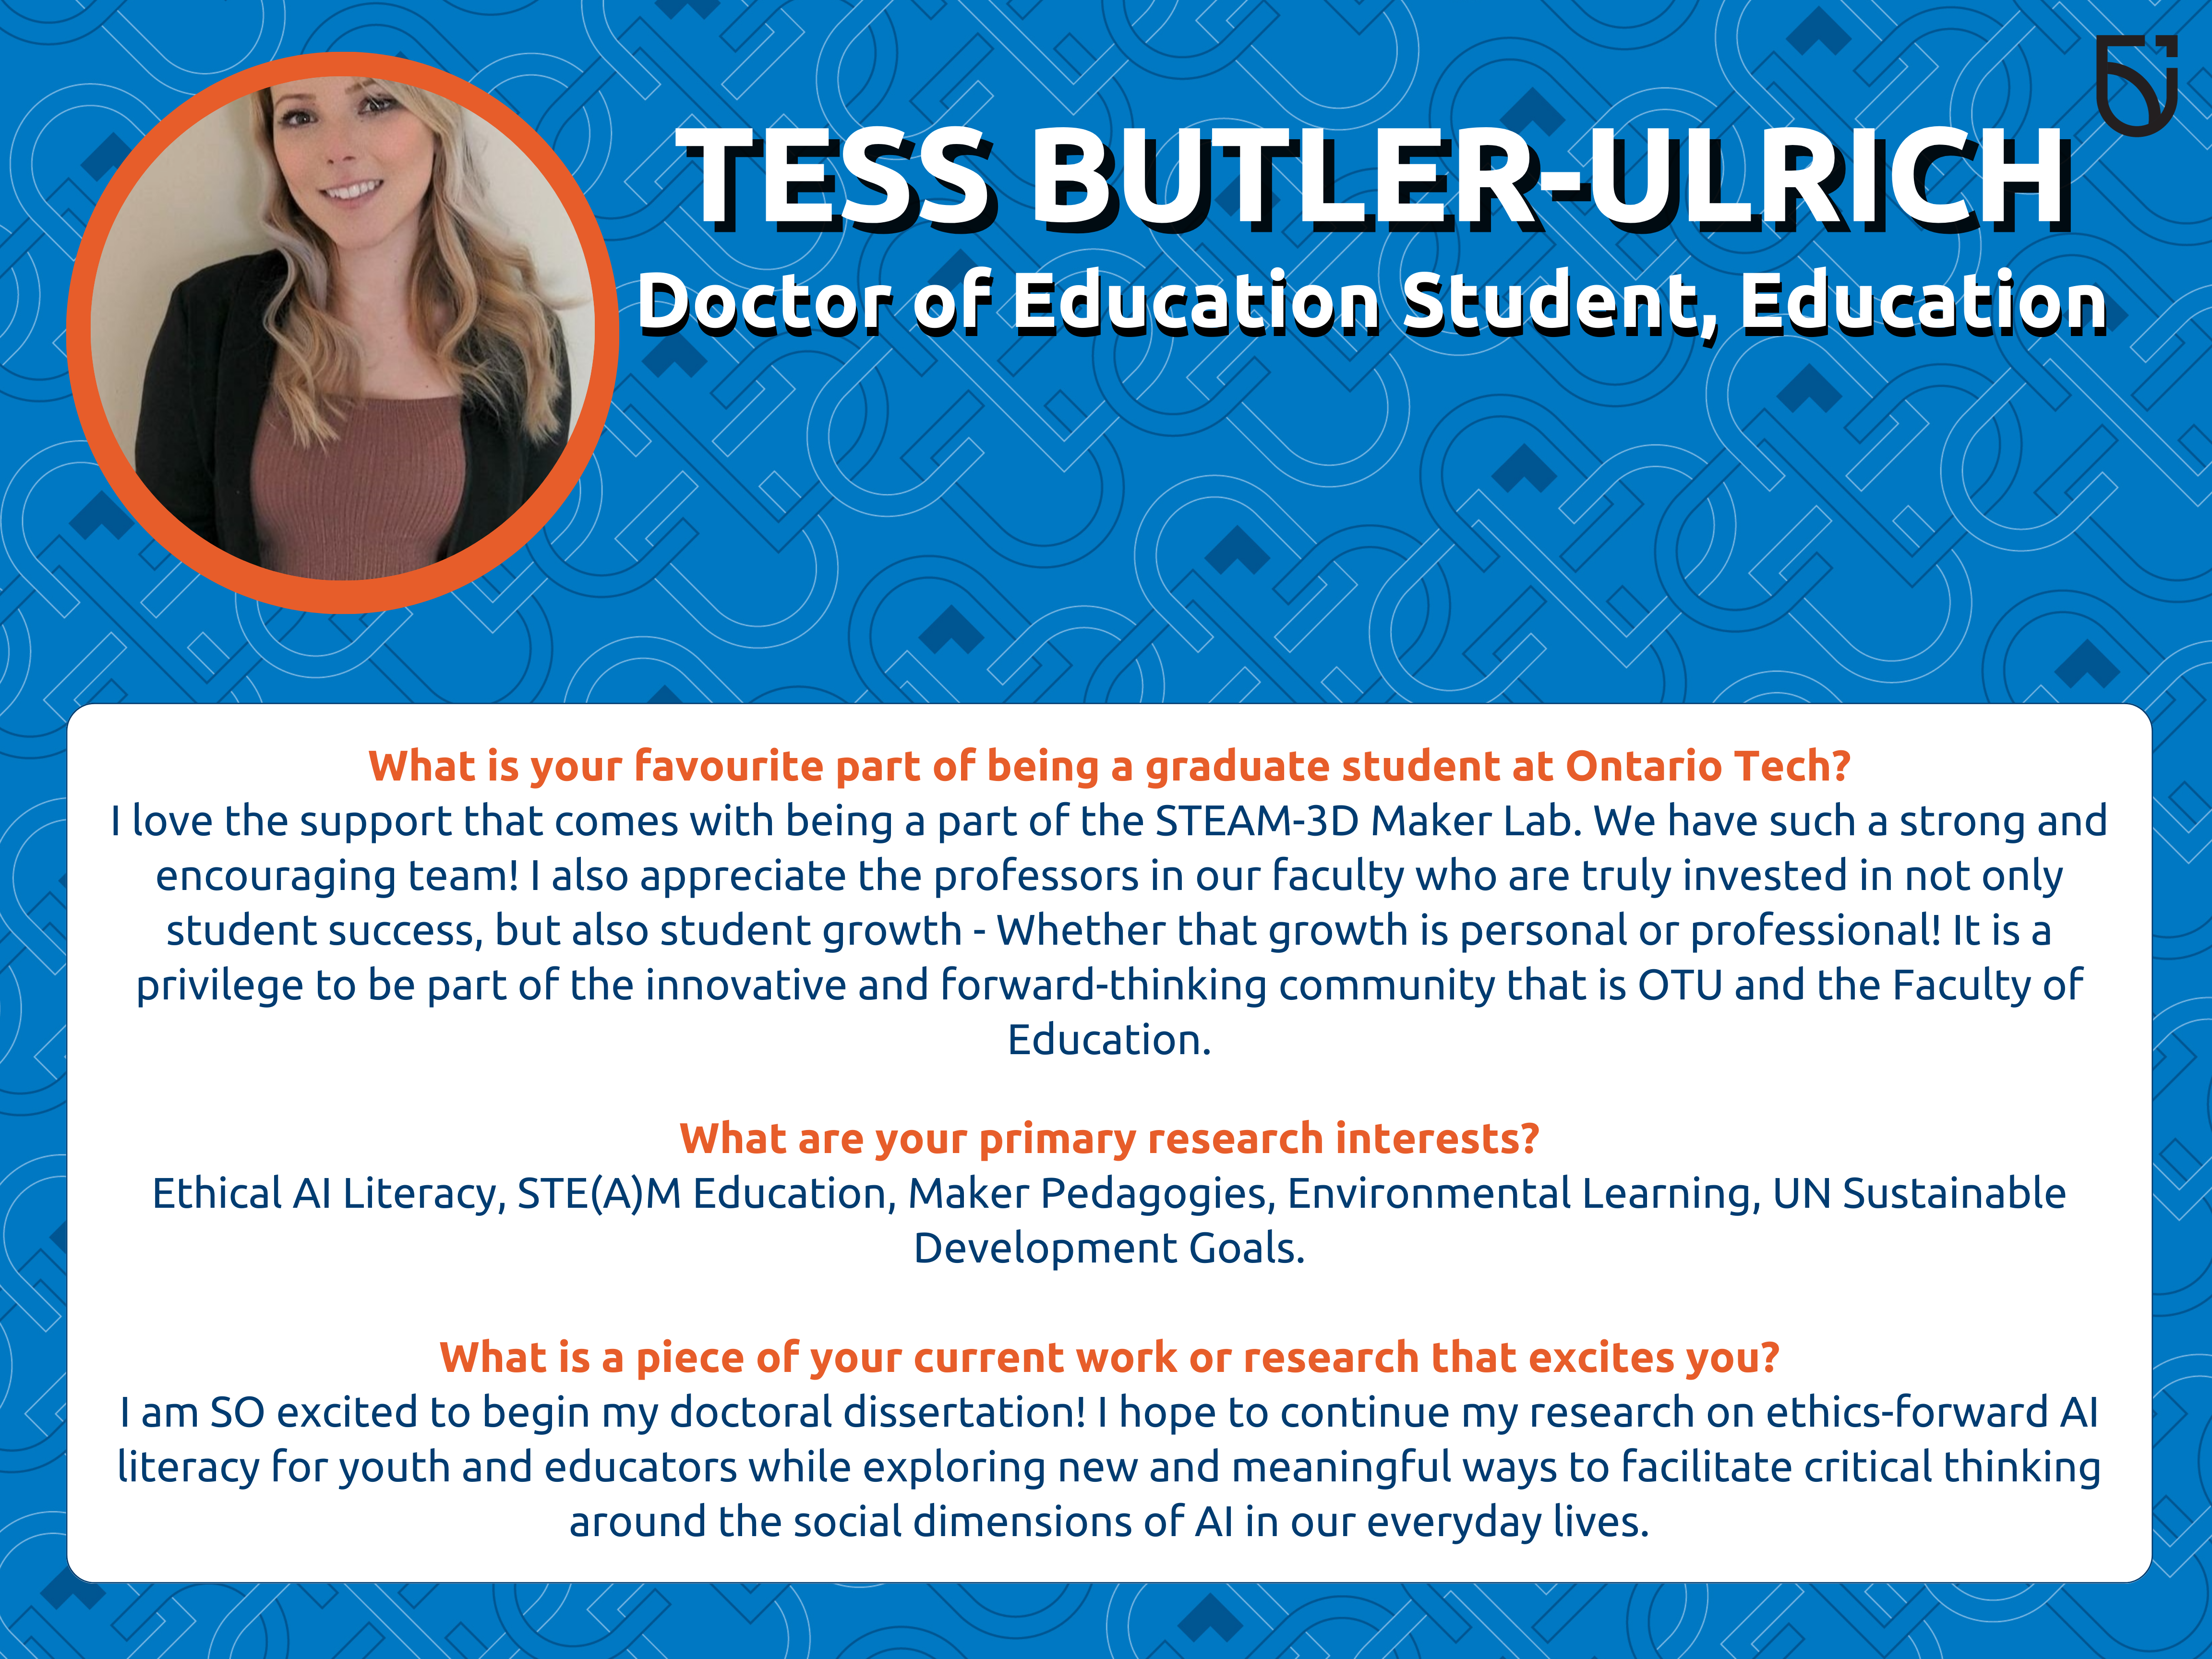 This photo is a Women’s Wednesday feature of Tess Butler-Ulrich, a Doctor of Education Graduate Student in the Mitch and Leslie Frazer Faculty of Education